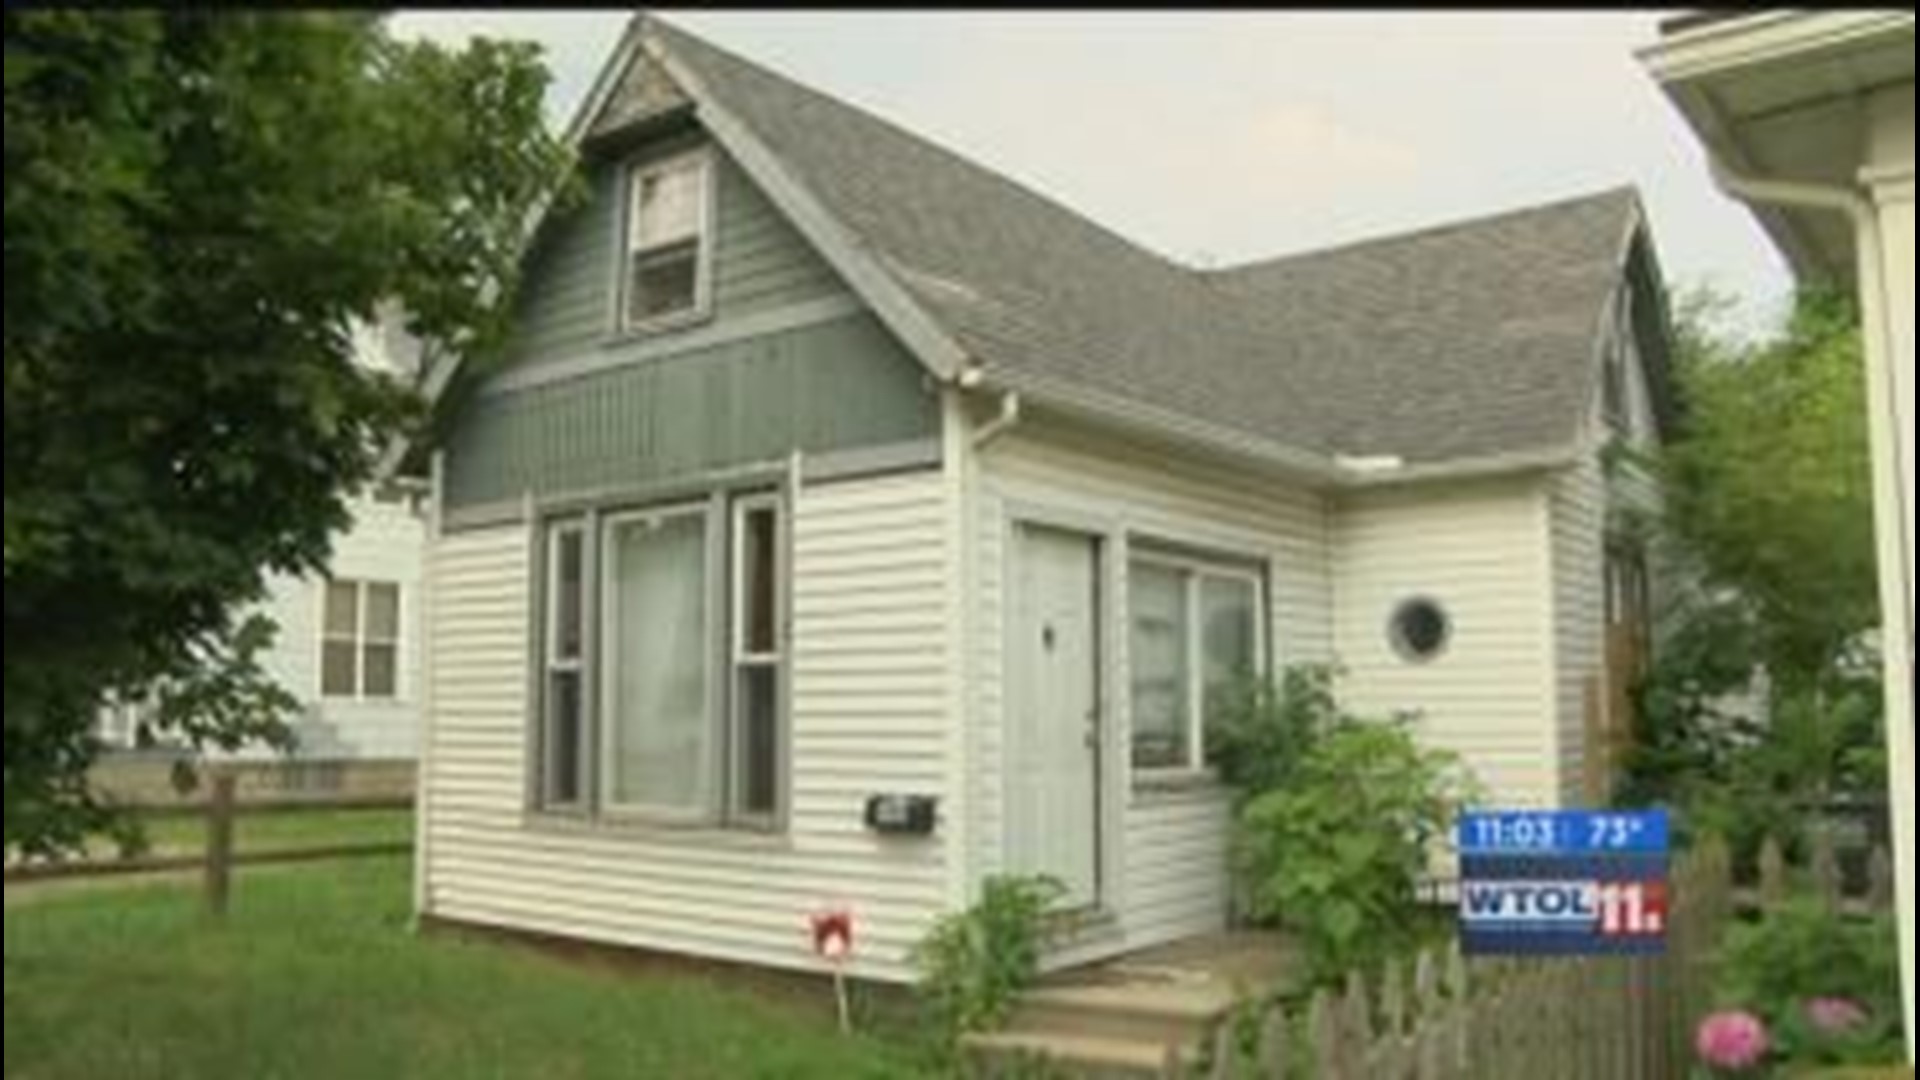 Call 11 for Action: Grandmother's home threatened by neighbor's tree